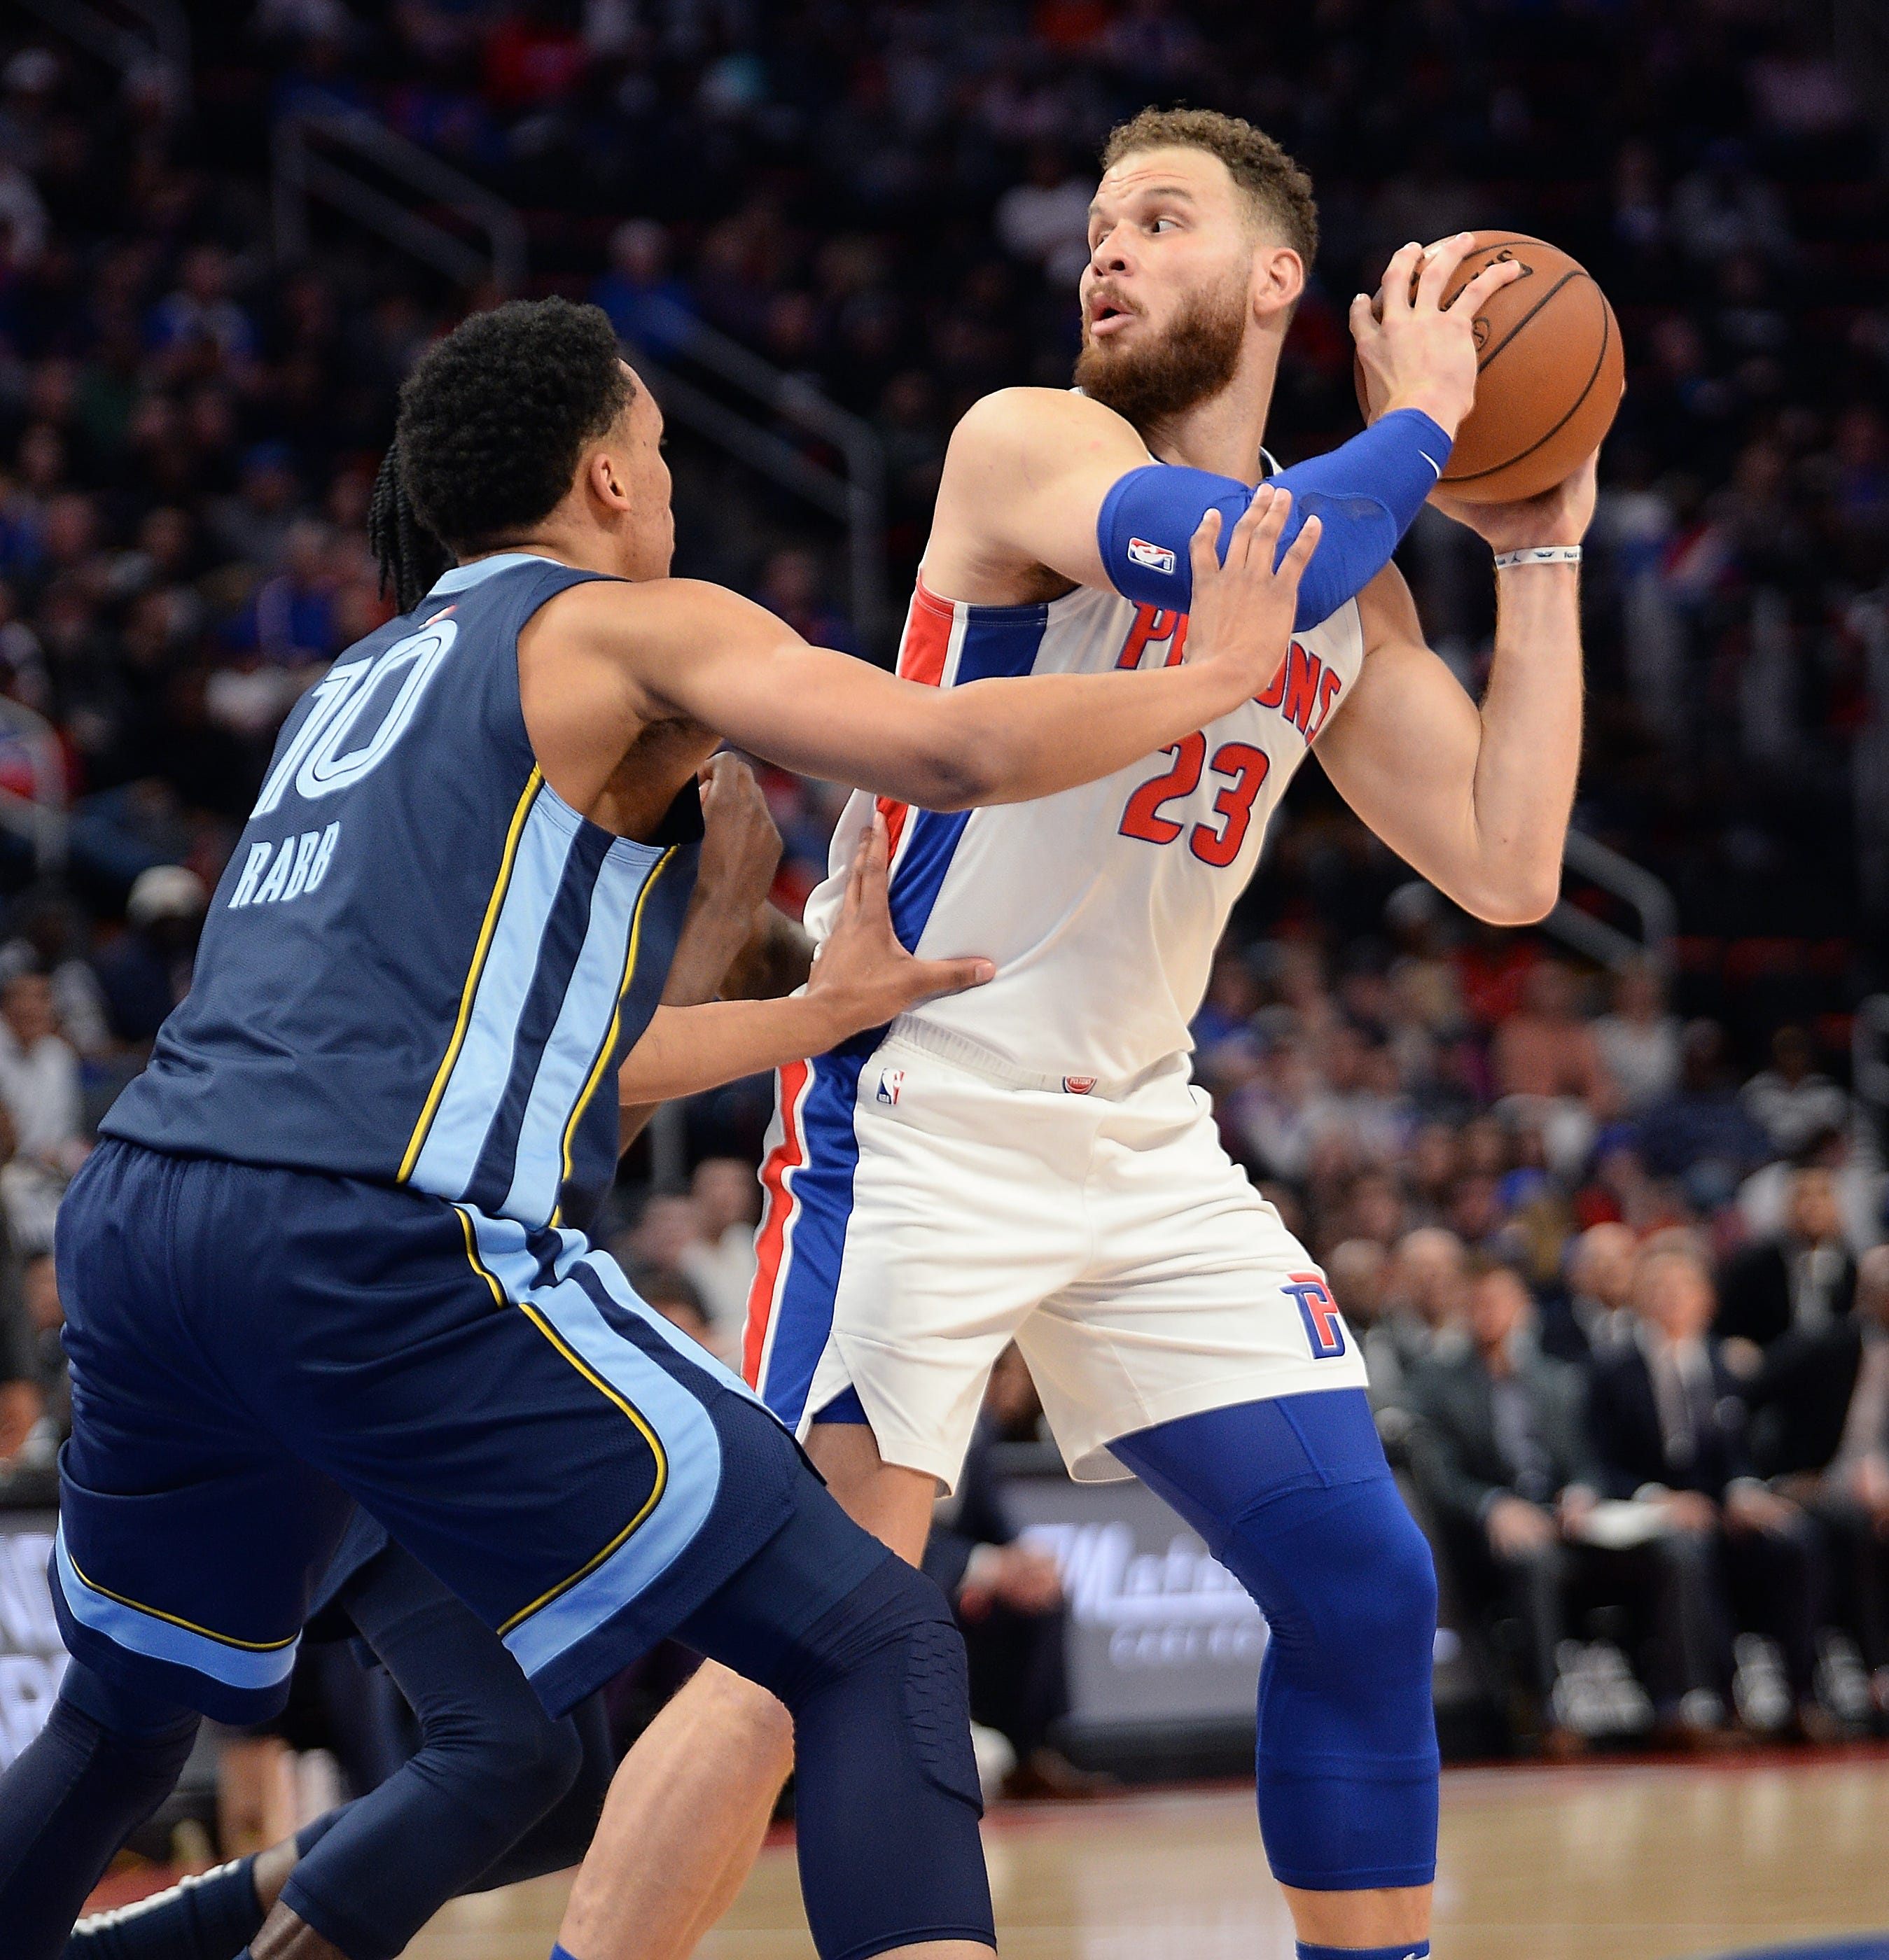 The Pistons struggle when Blake Griffin isn't in the lineup, winning only one of the six games he's missed this season